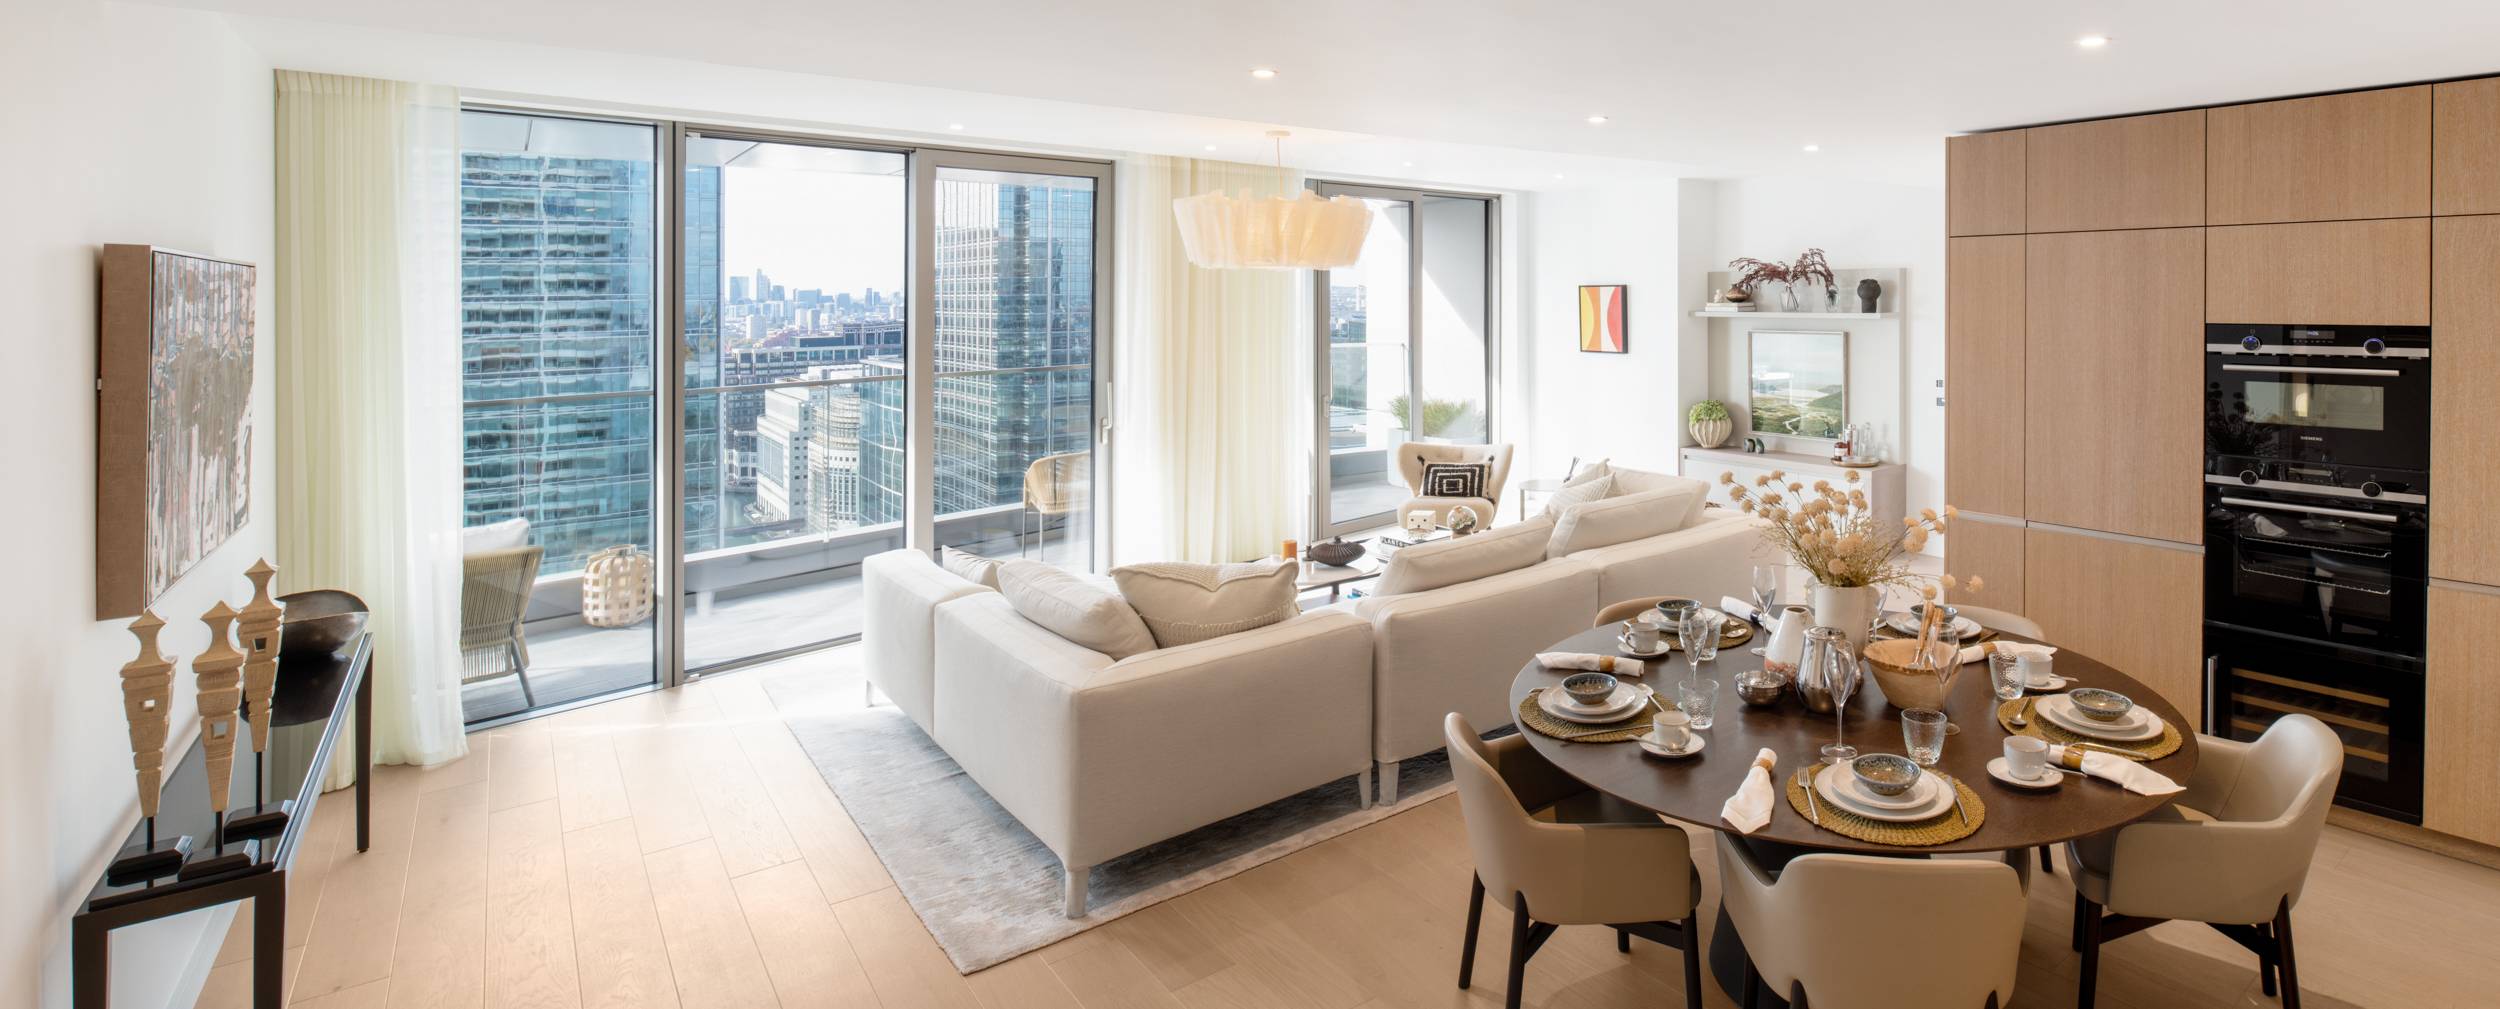 The apartment offers amazing views from the 41st floor as well as plenty of living space with its 1335 sq ft of internal area and 230 sq ft balcony.